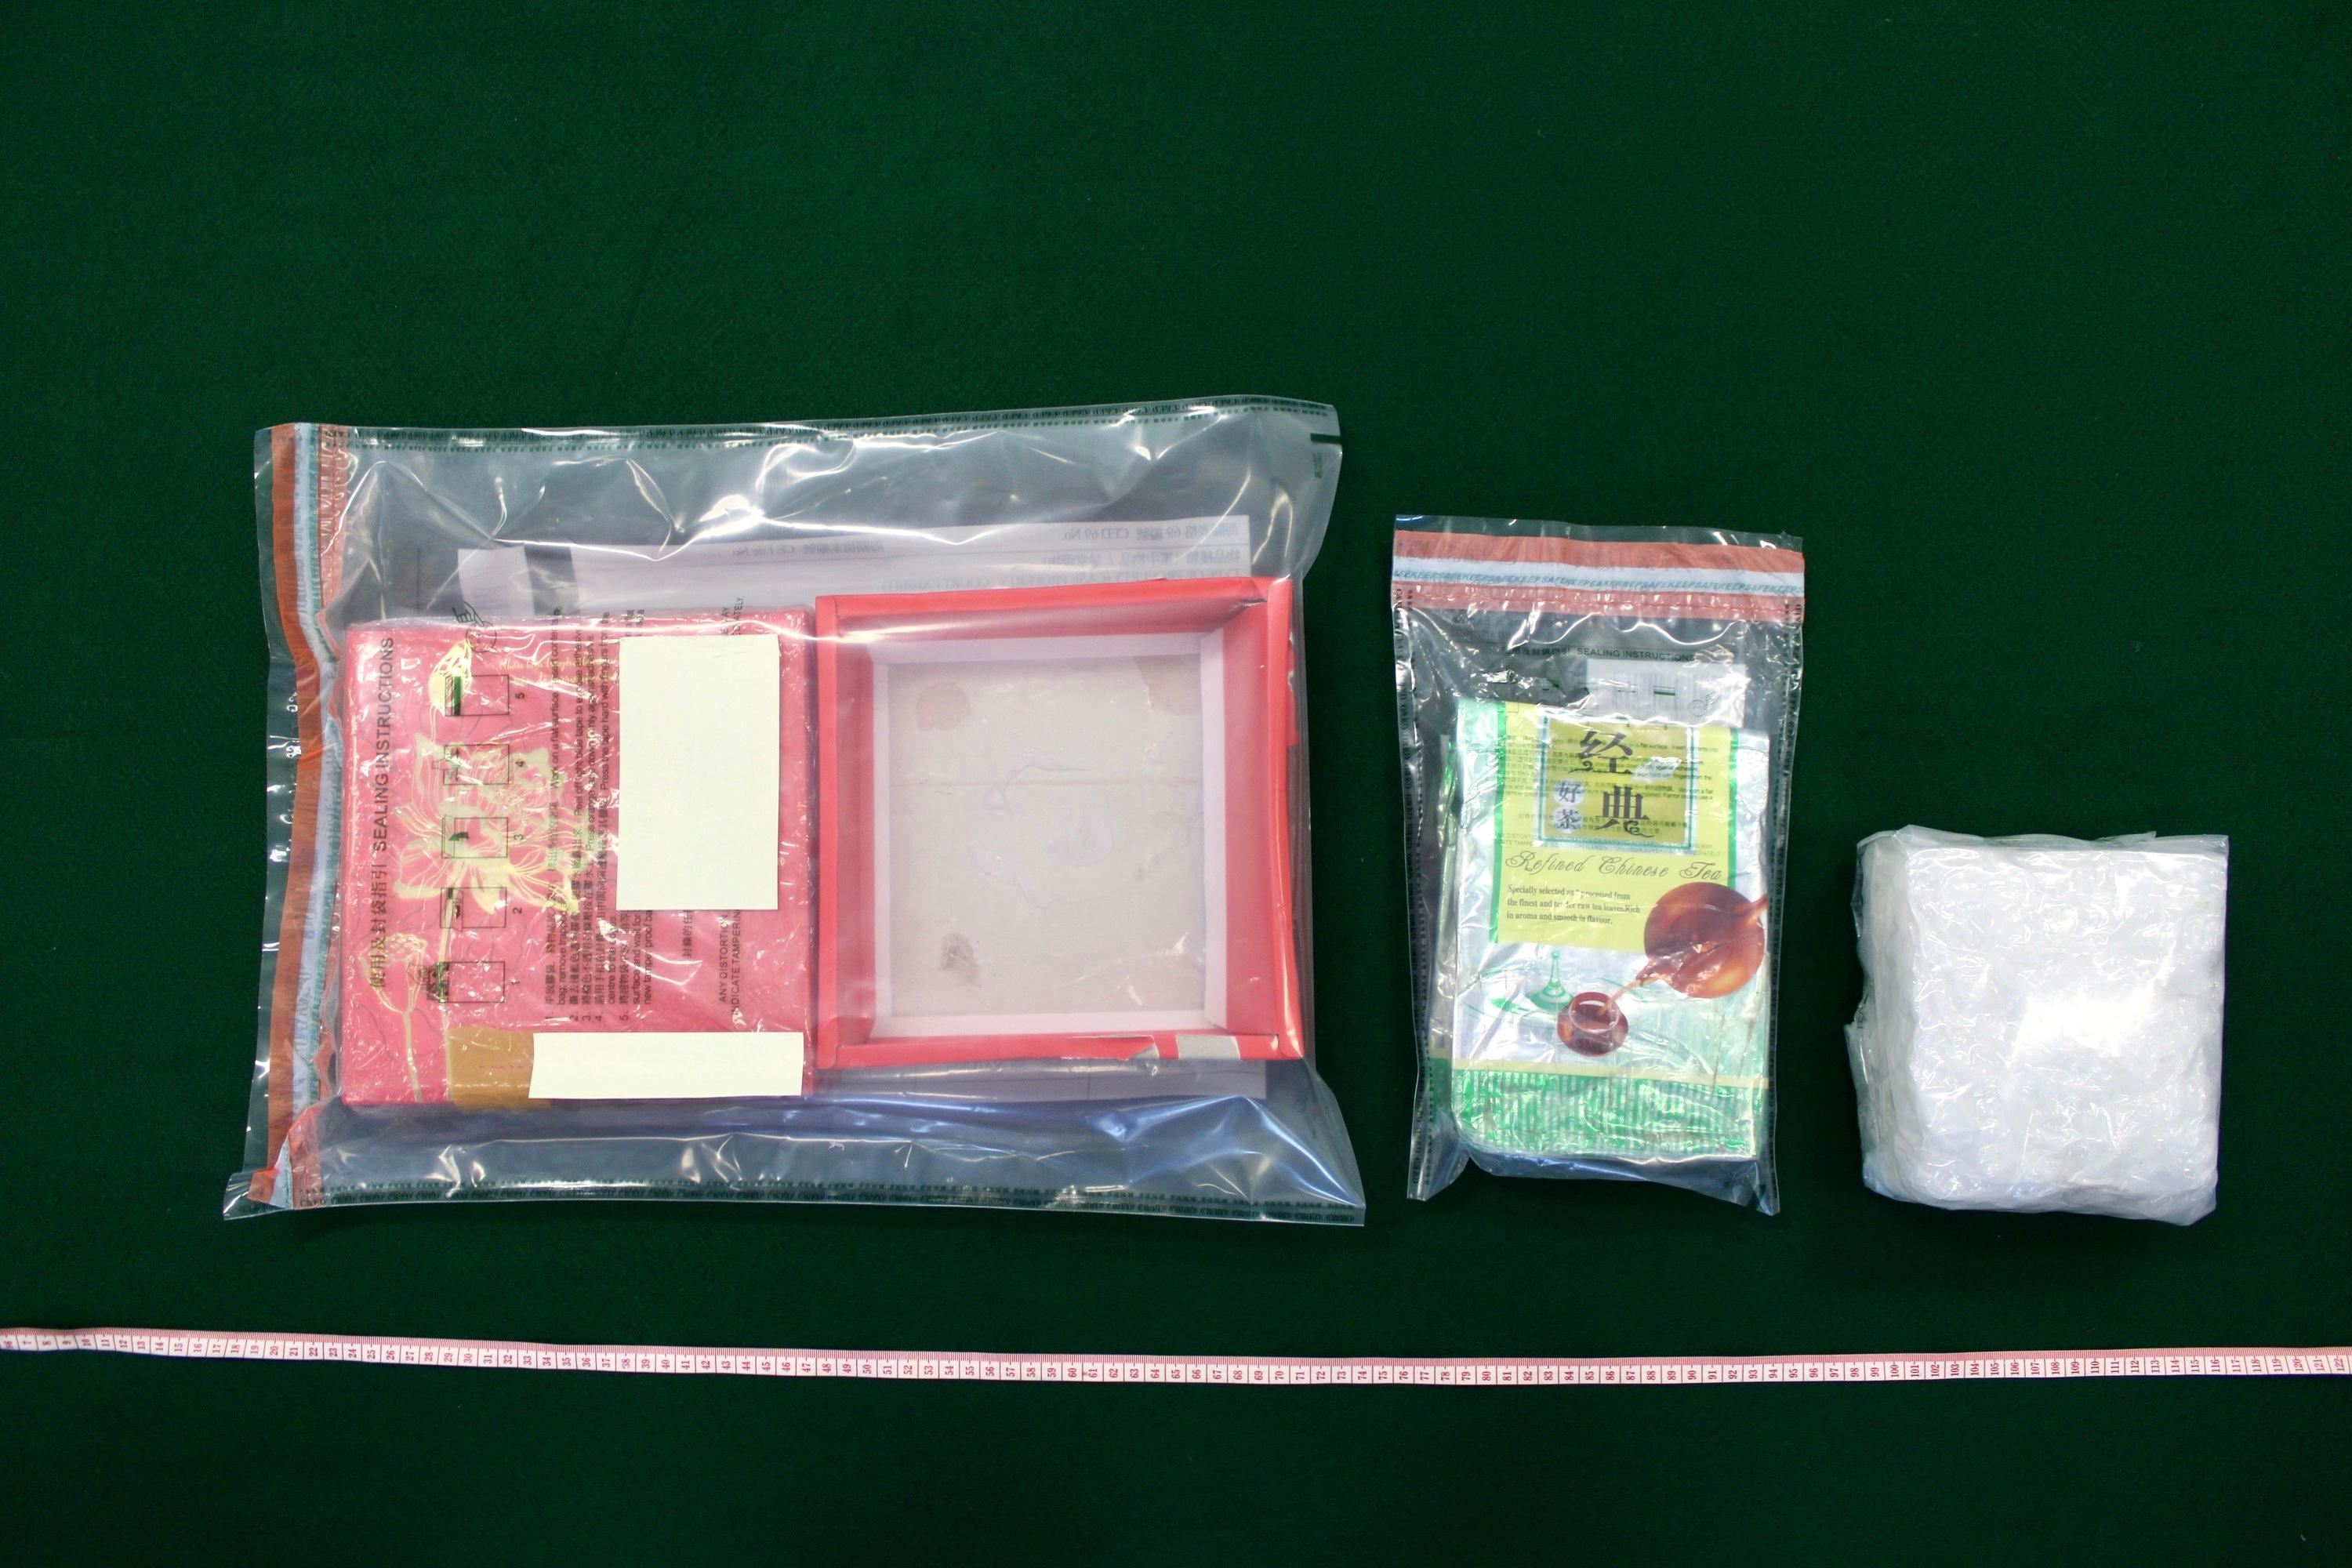 Hong Kong Customs detected two dangerous drugs cases on November 11 and 14, and seized about 8 kilograms of suspected methamphetamine and about 14kg of suspected heroin in Kwai Chung and Tin Shui Wai respectively, with a total estimated market value of about $17 million. Photo shows a biscuit gift set used to conceal the drugs, which contained a tea leaf packaging bag with suspected methamphetamine concealed inside.